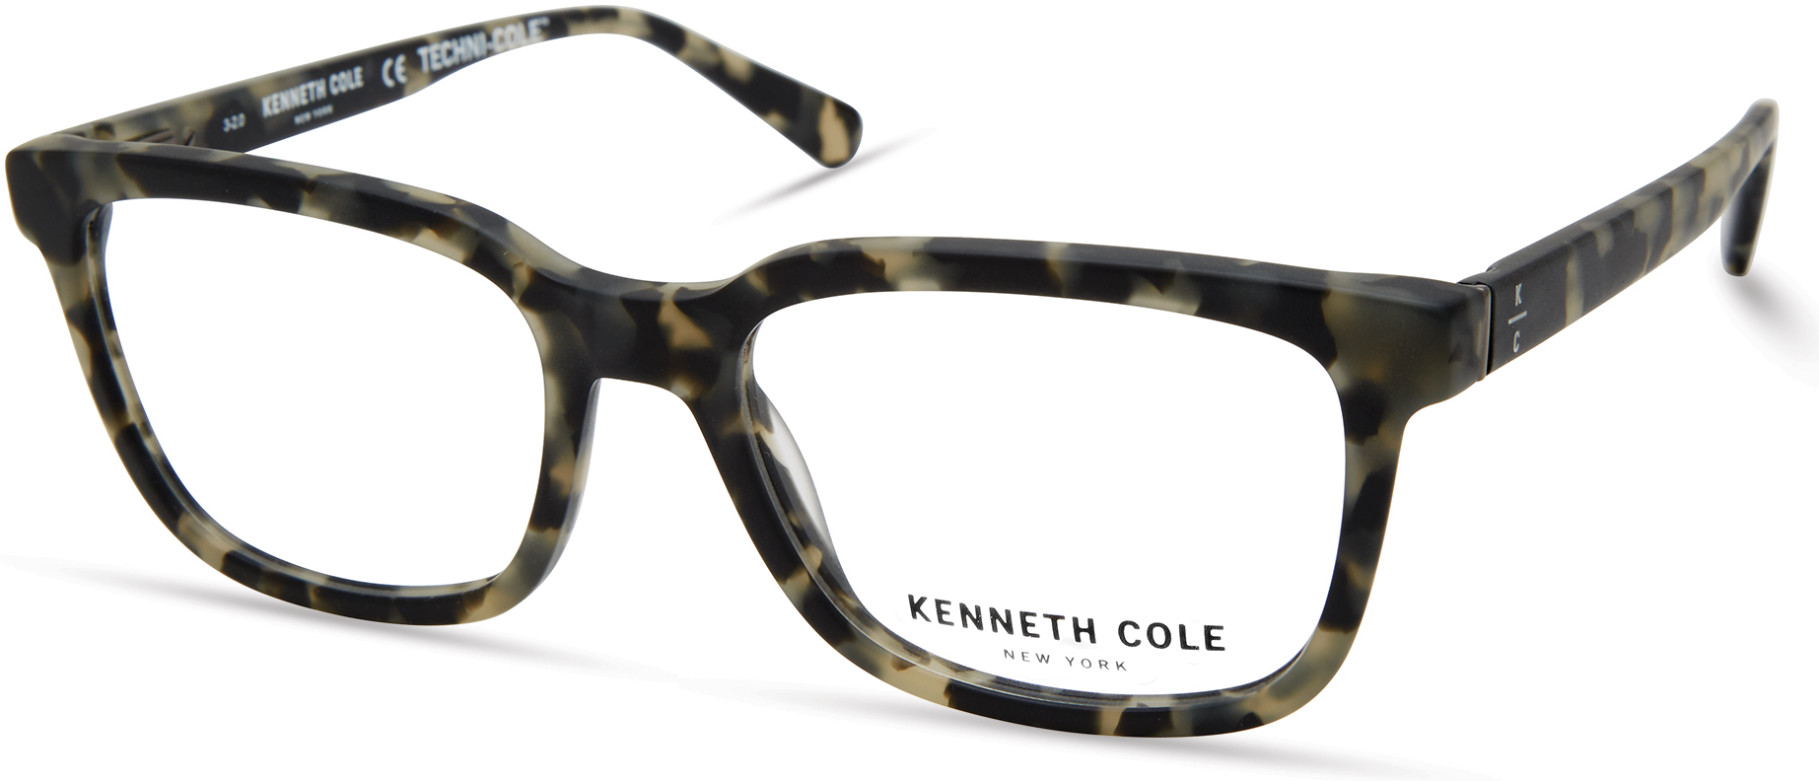 KENNETH COLE NY 0320 098